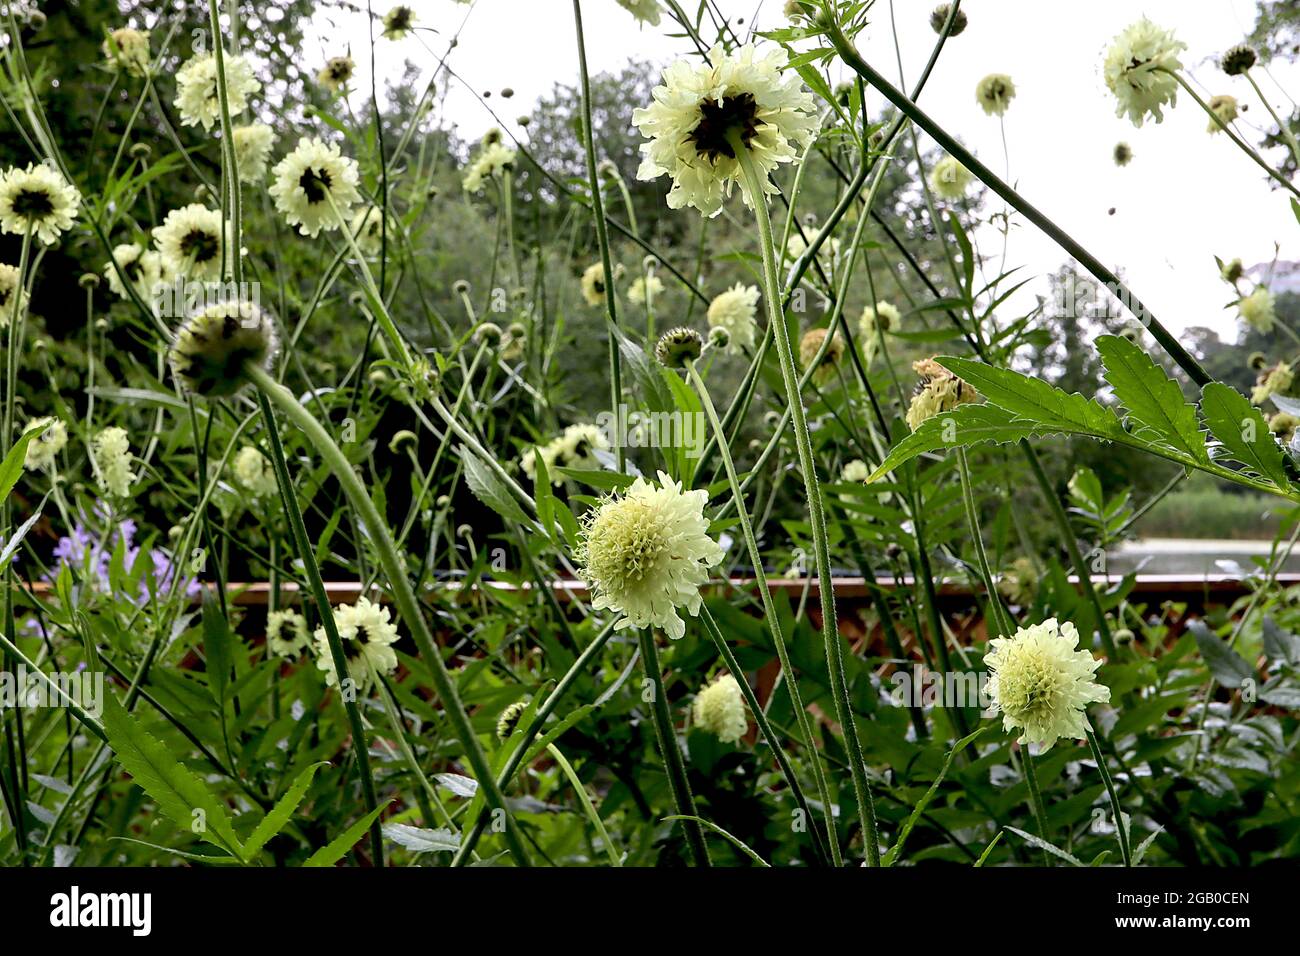 Cephalaria alpina yellow cephalaria / alpine scabious – pale yellow flowers with outer and inner florets on very tall stems,  June, England, UK Stock Photo